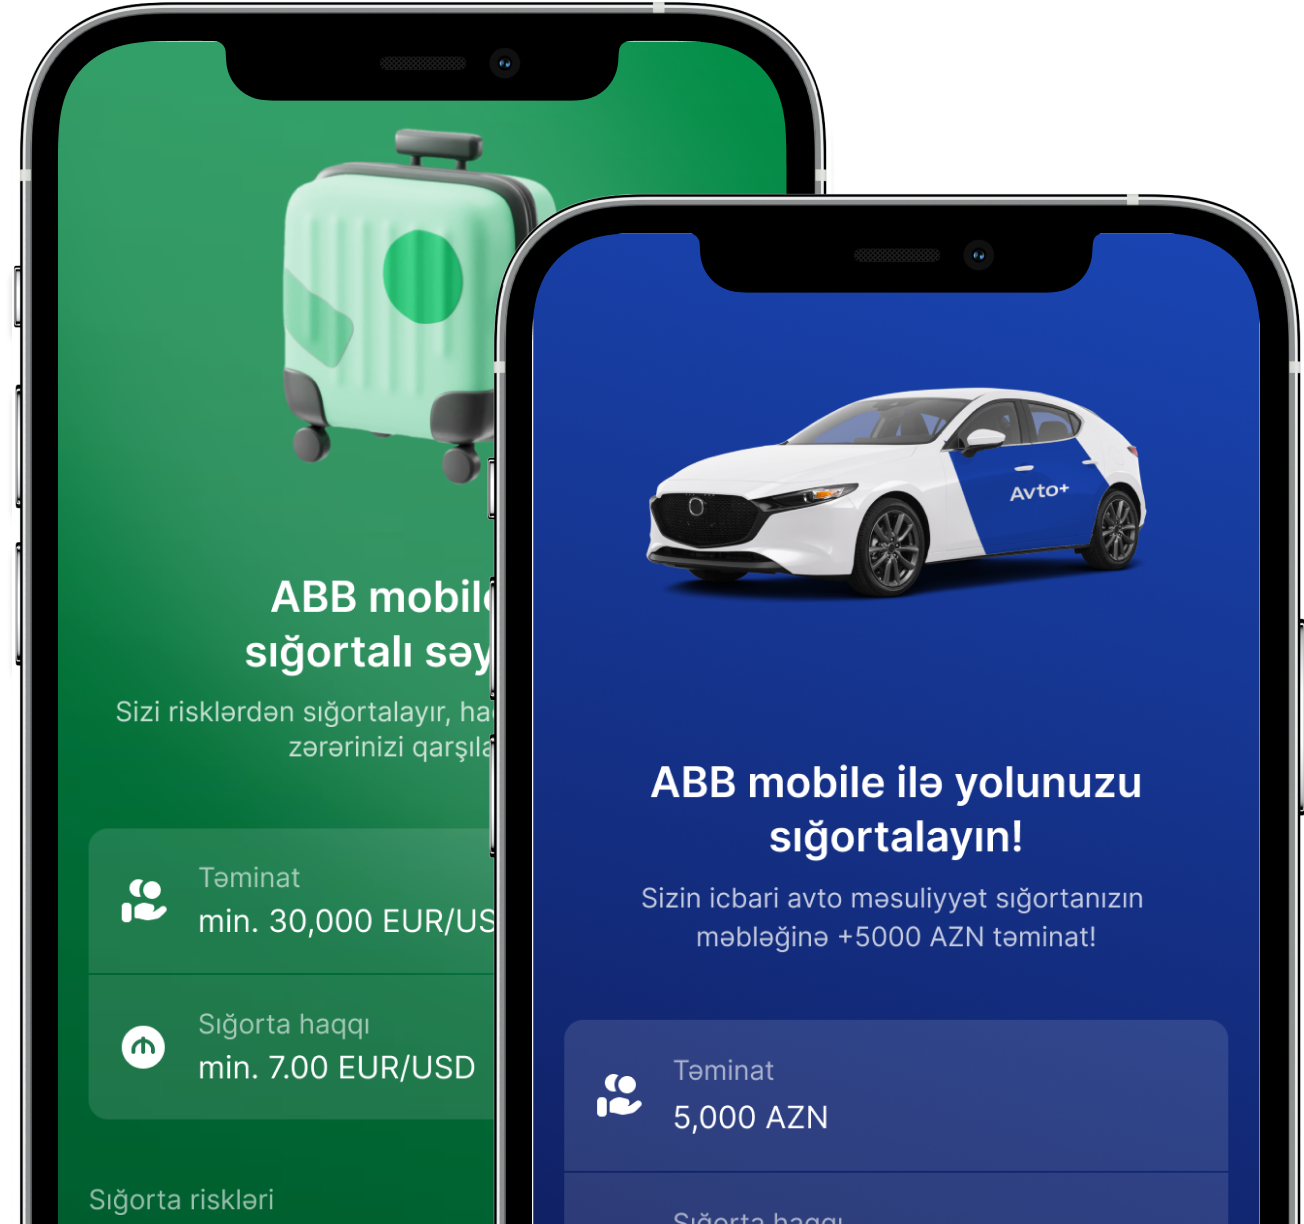 abb invest mobile